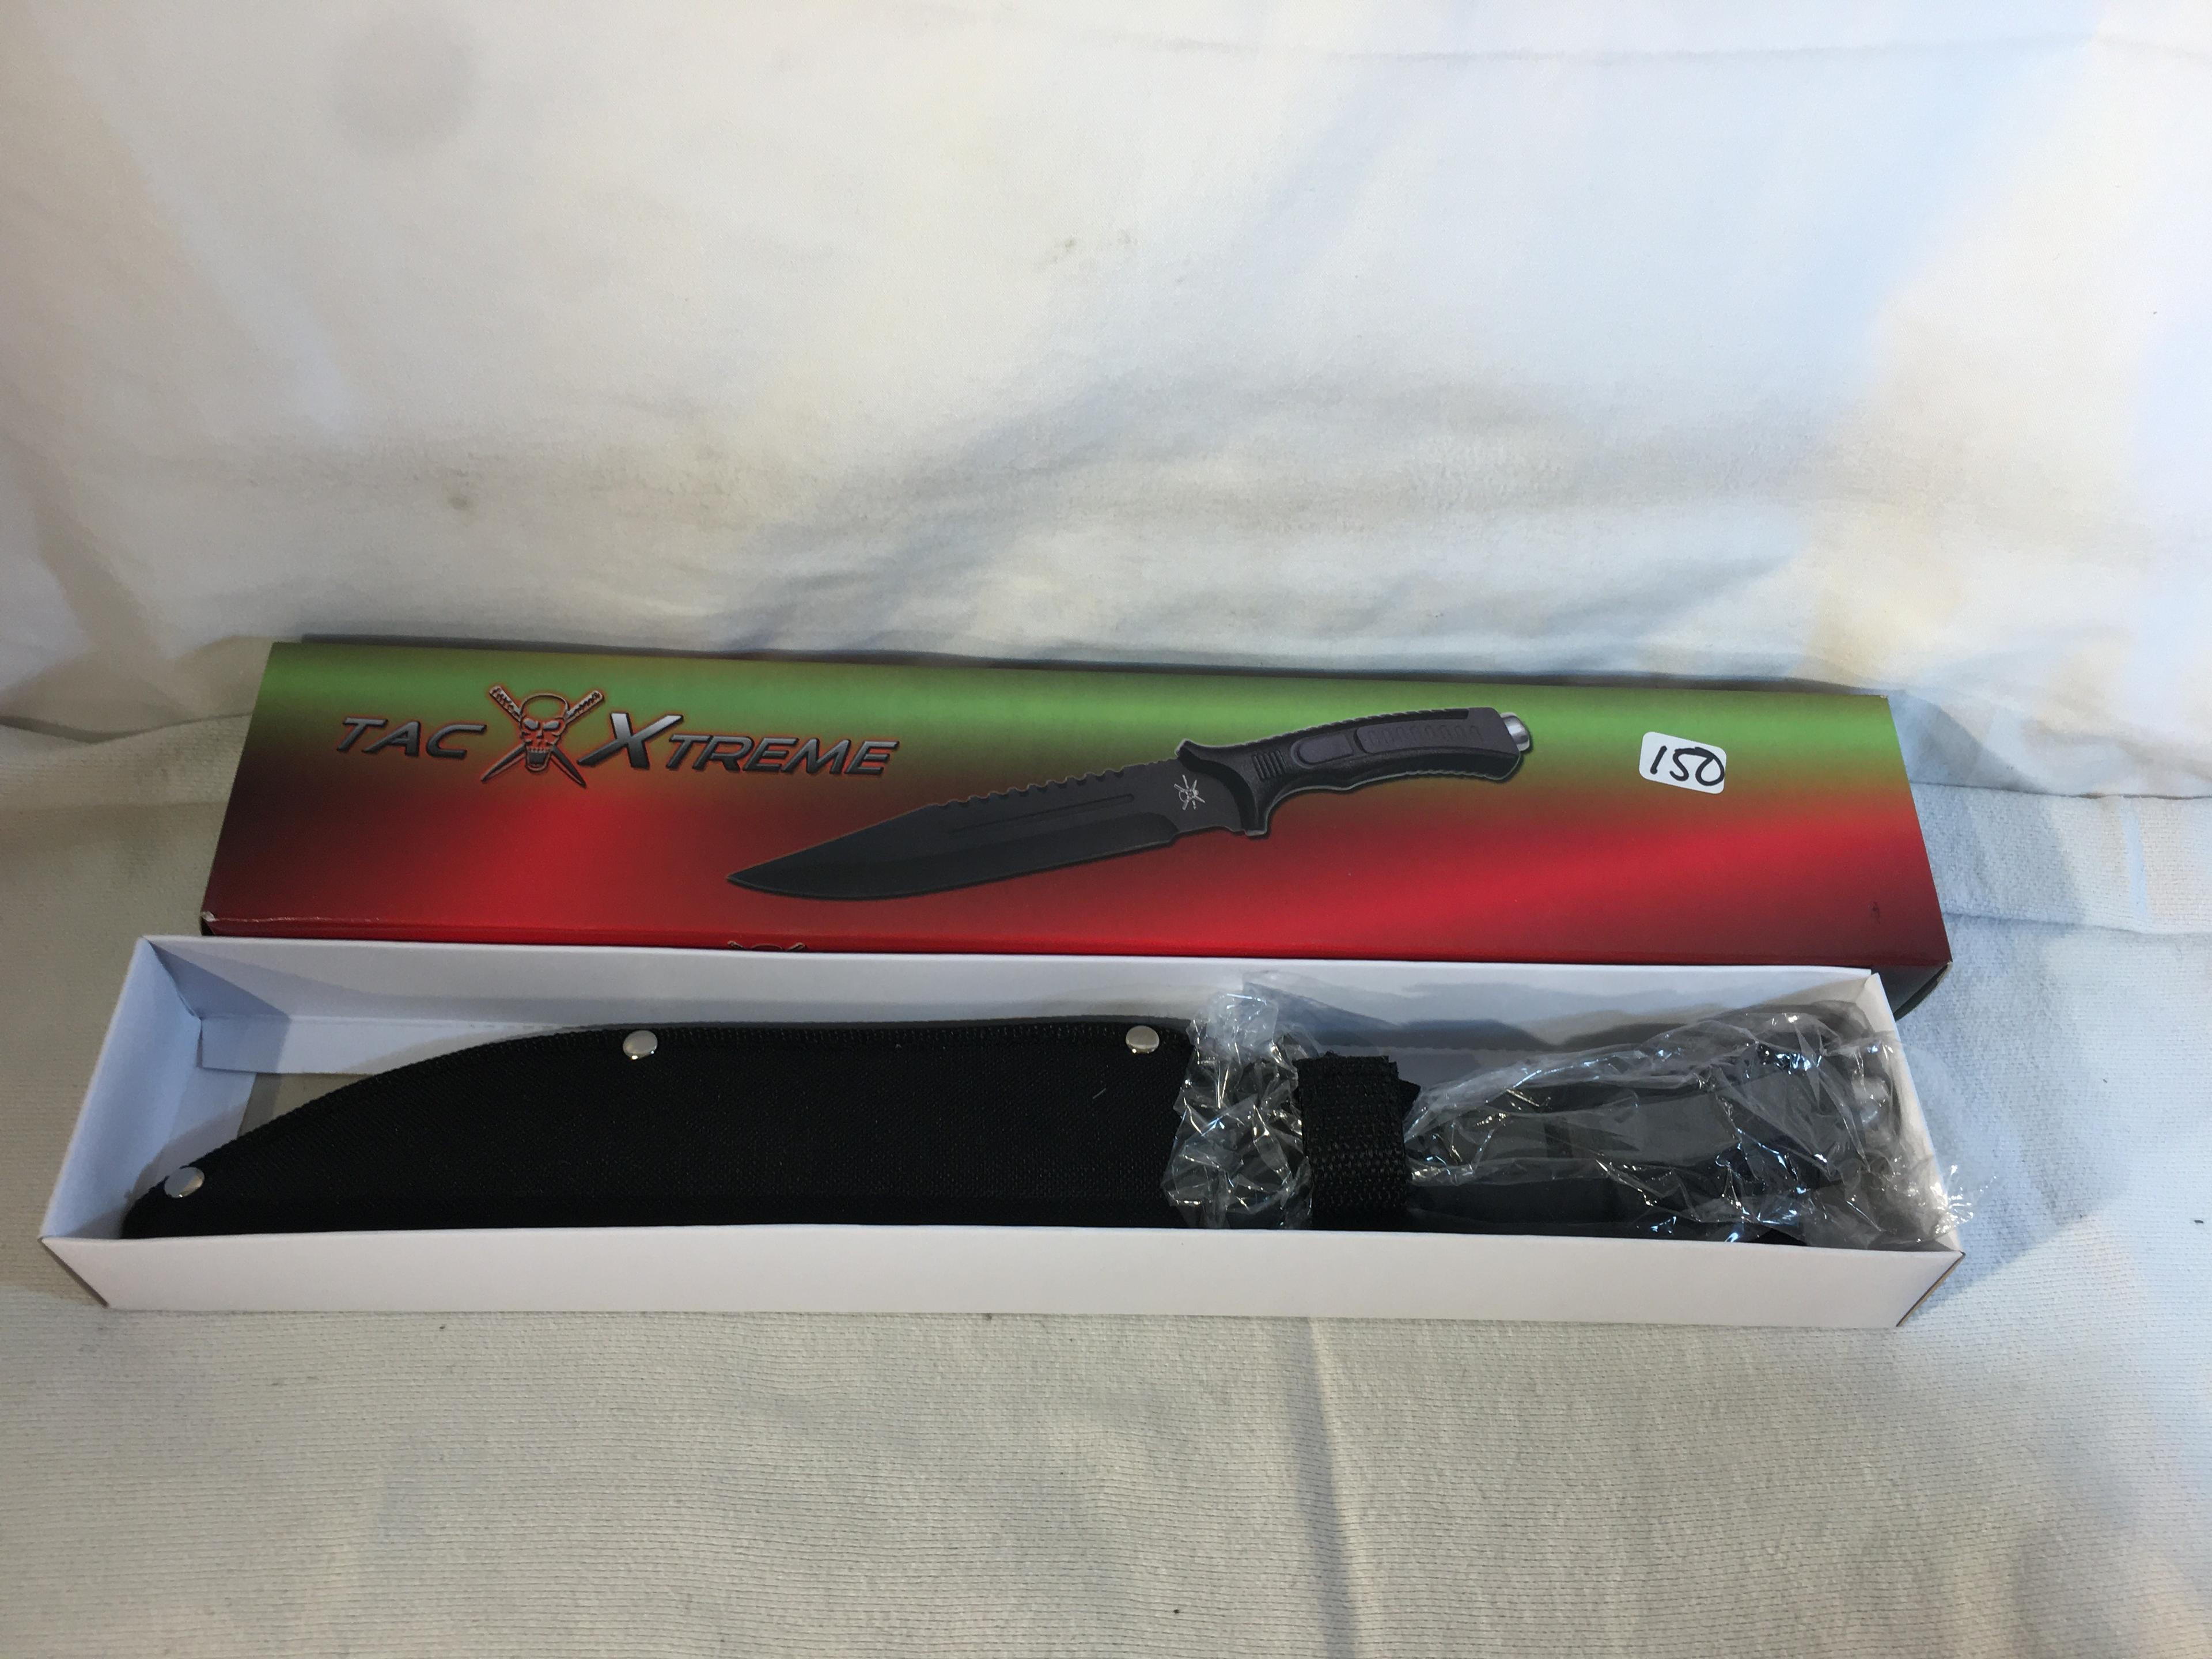 New Collector Tac Xtreme TA-059B/GR Knive 13"Tall Fixed Blade Knife Black Blade with Blood Groove